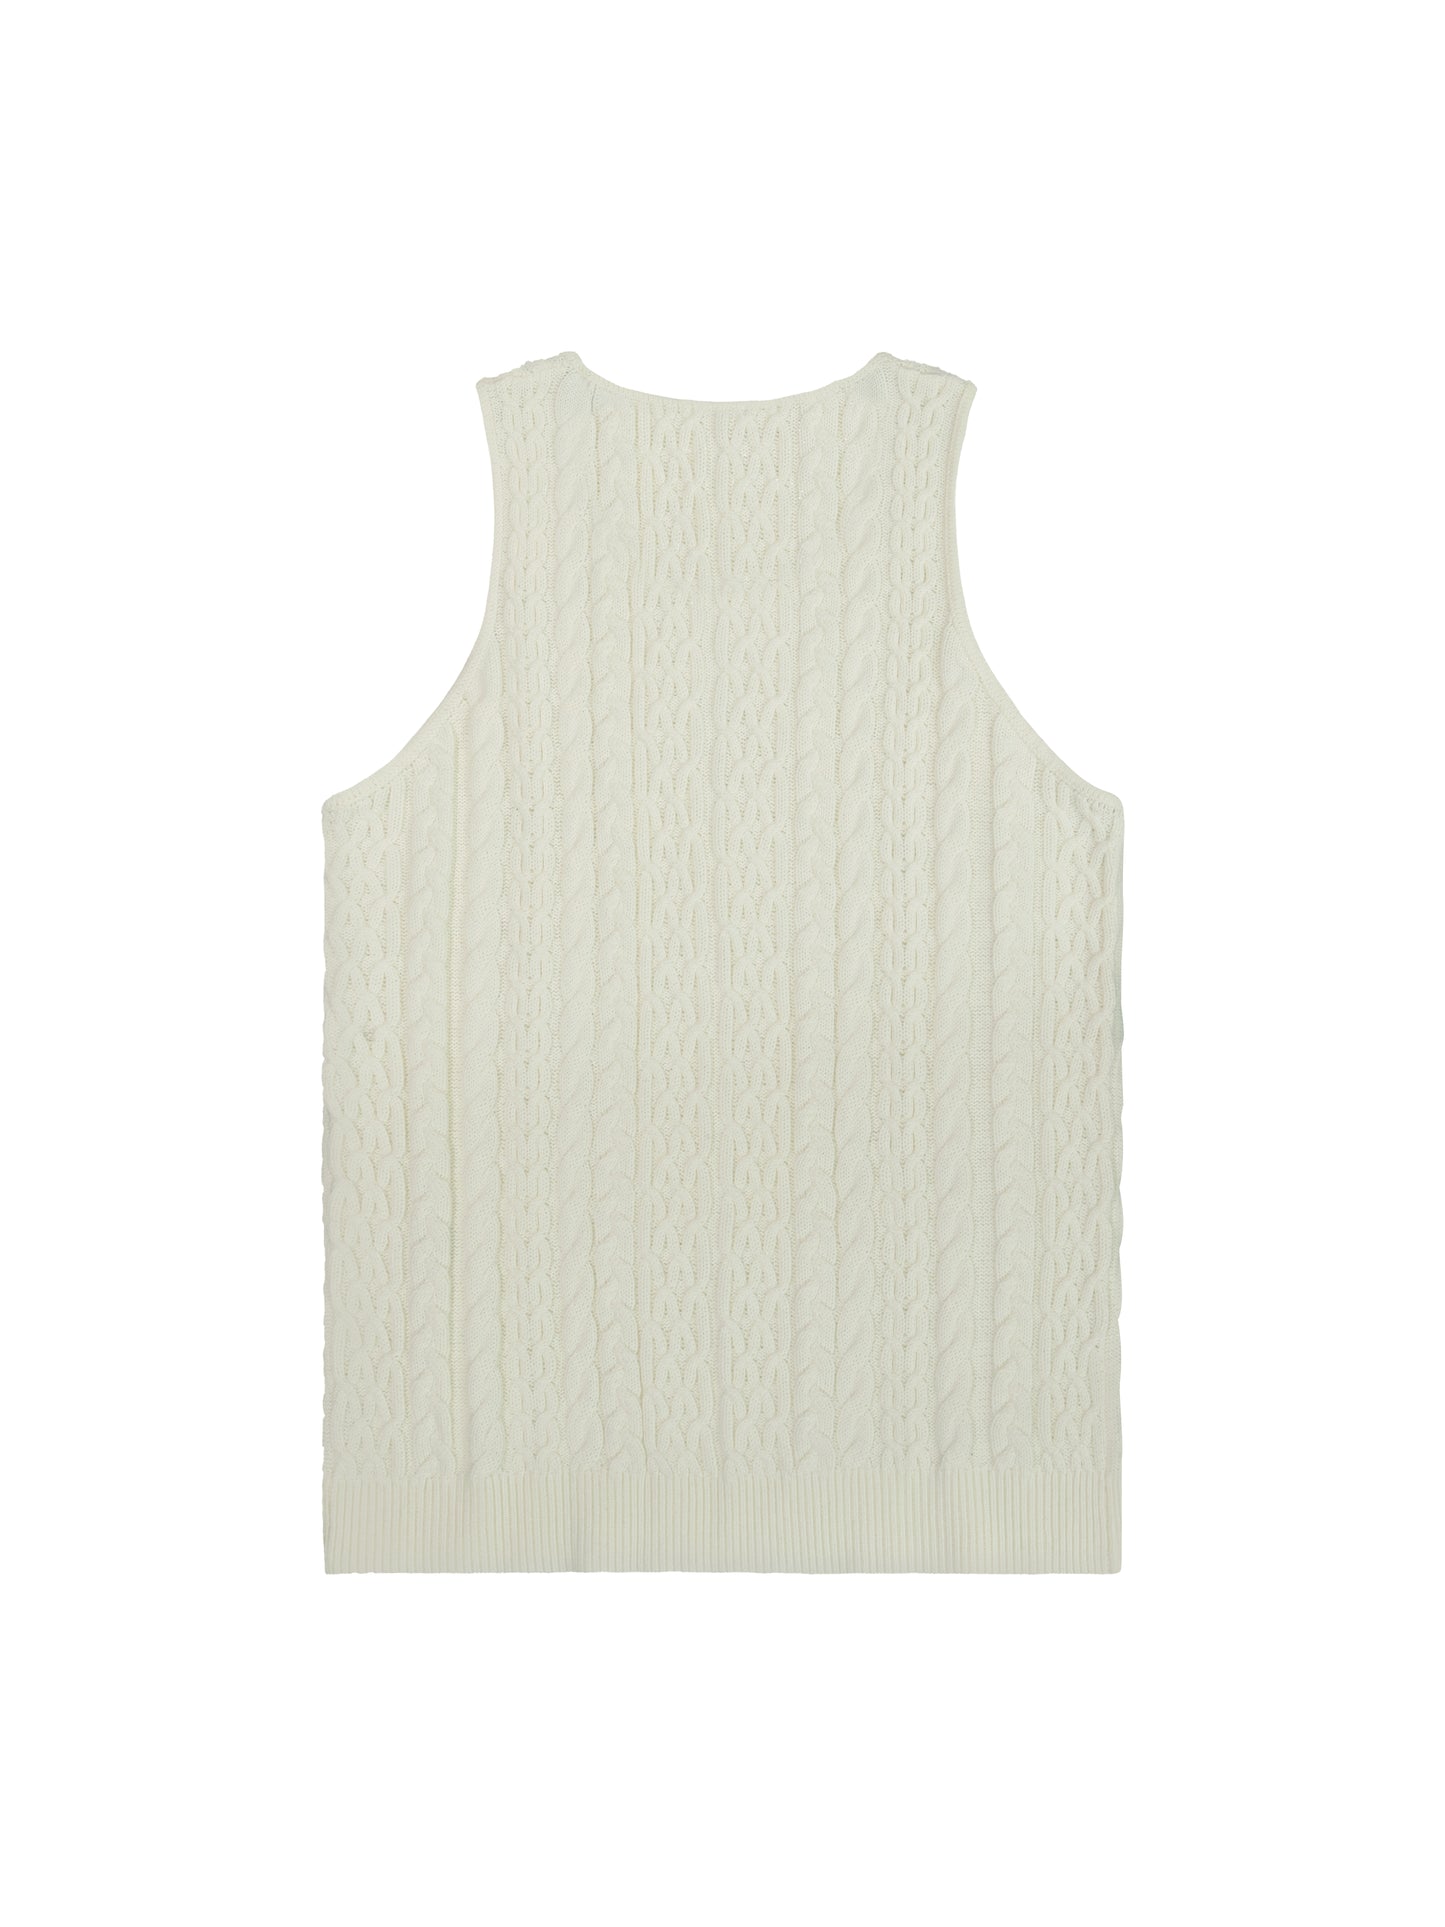 CABEL KNIT WIFEBEATER